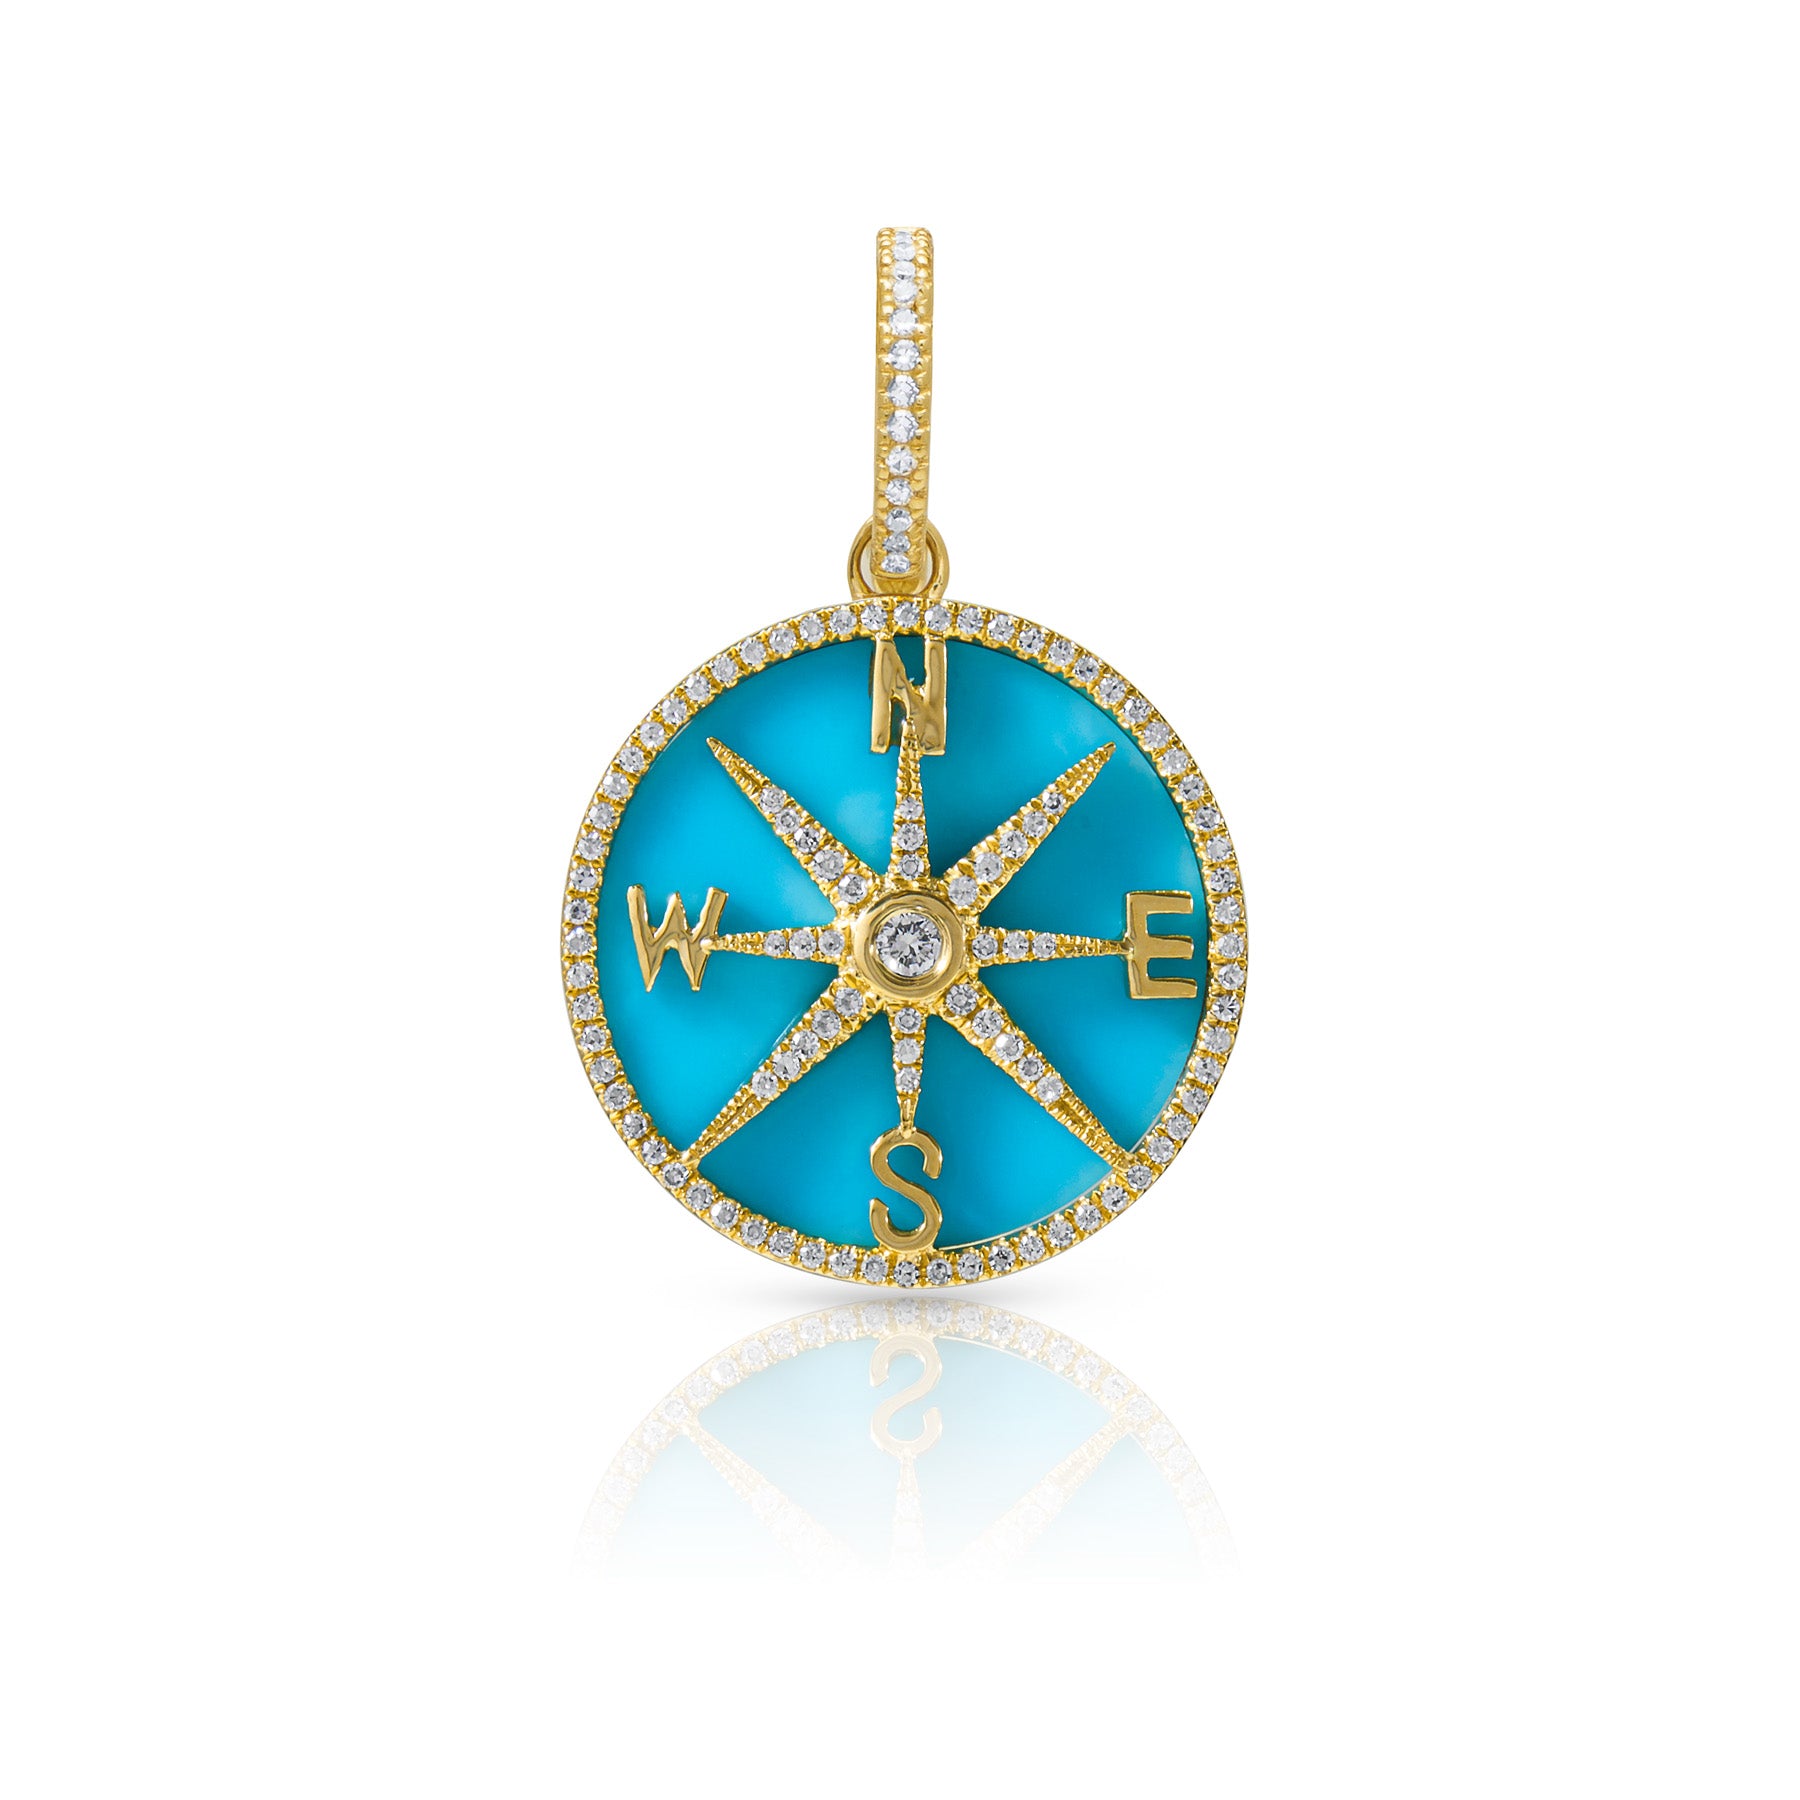 14KT Yellow Gold Turquoise Diamond Compass Medallion Charm with Diamond Clip on Bail